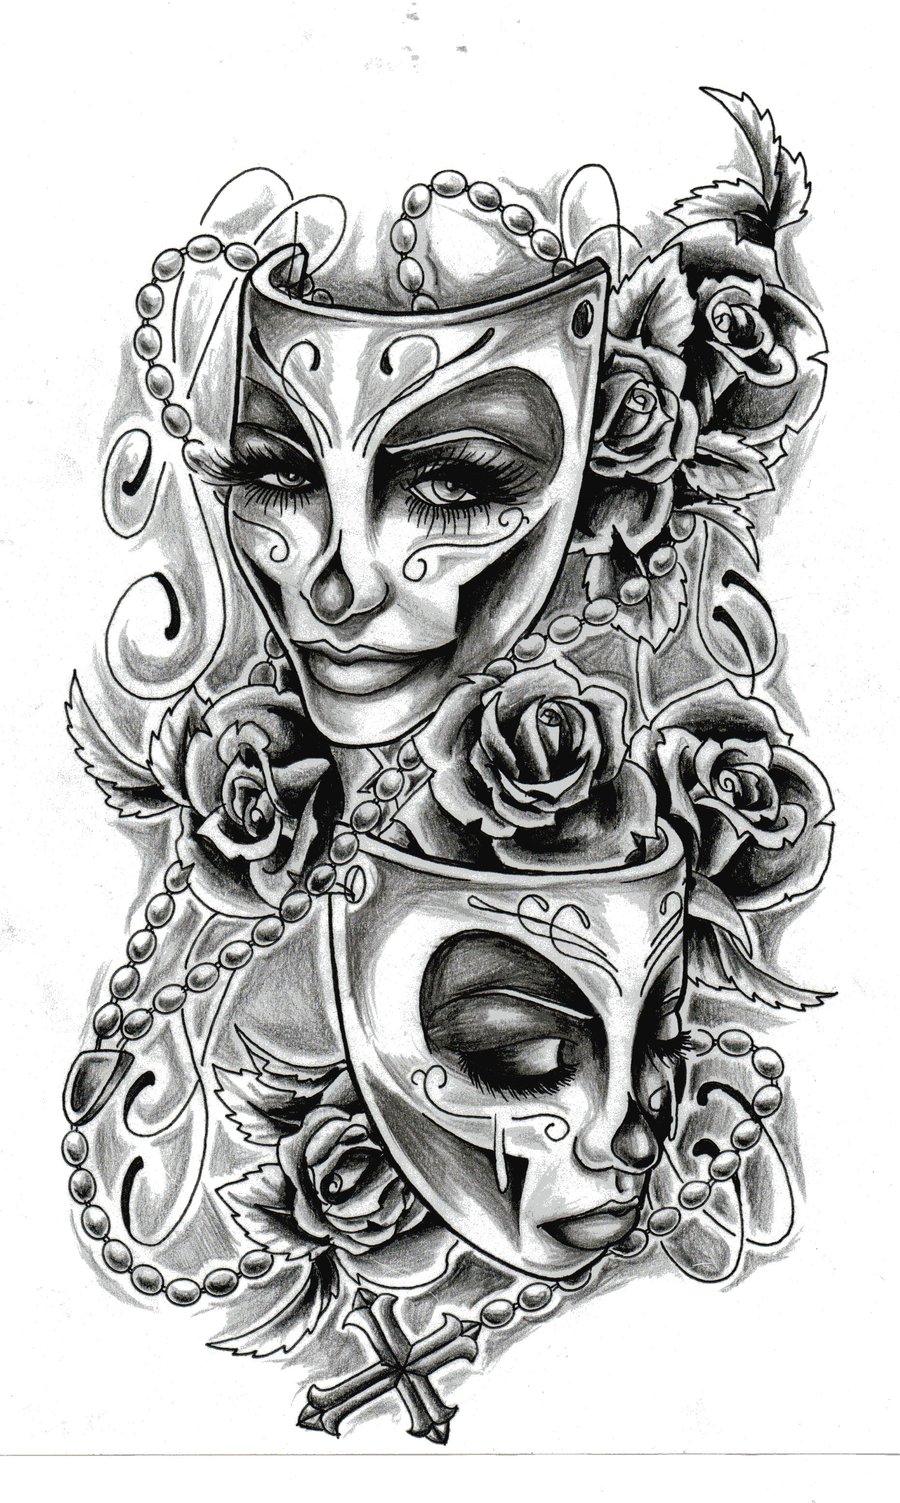 Free Tattoo Designs, Download Free Tattoo Designs png images, Free ...